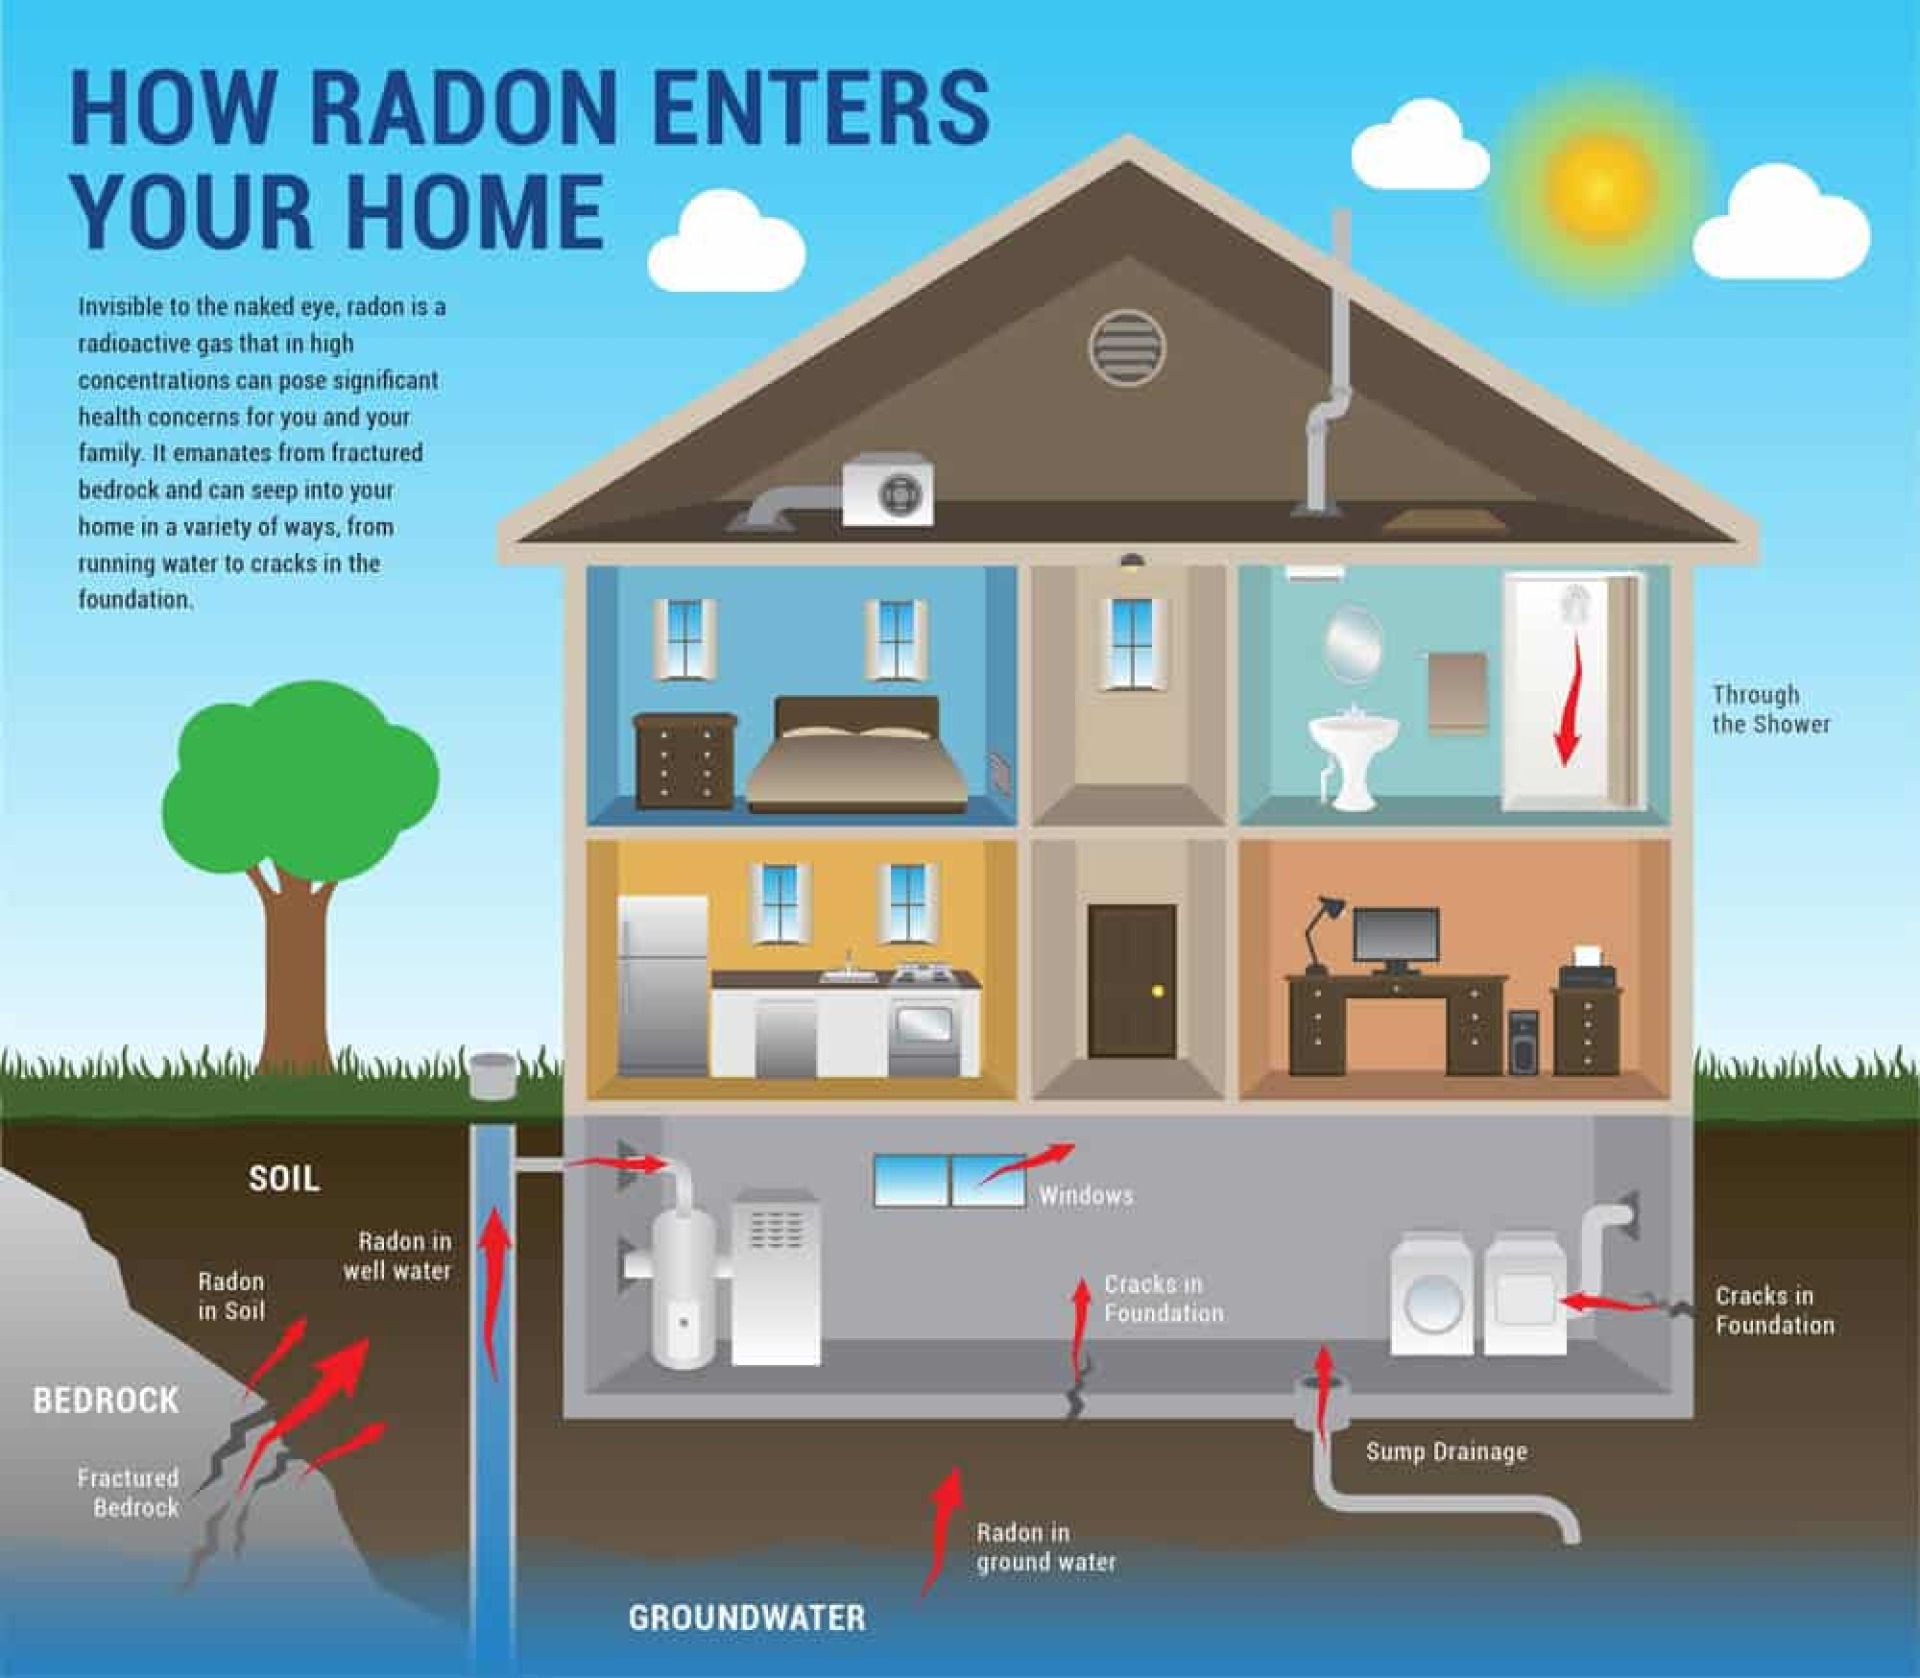 How Radon Enters Your Home: fractures bedrock, ground water, drainage, cracks in foundation, well water, and windows